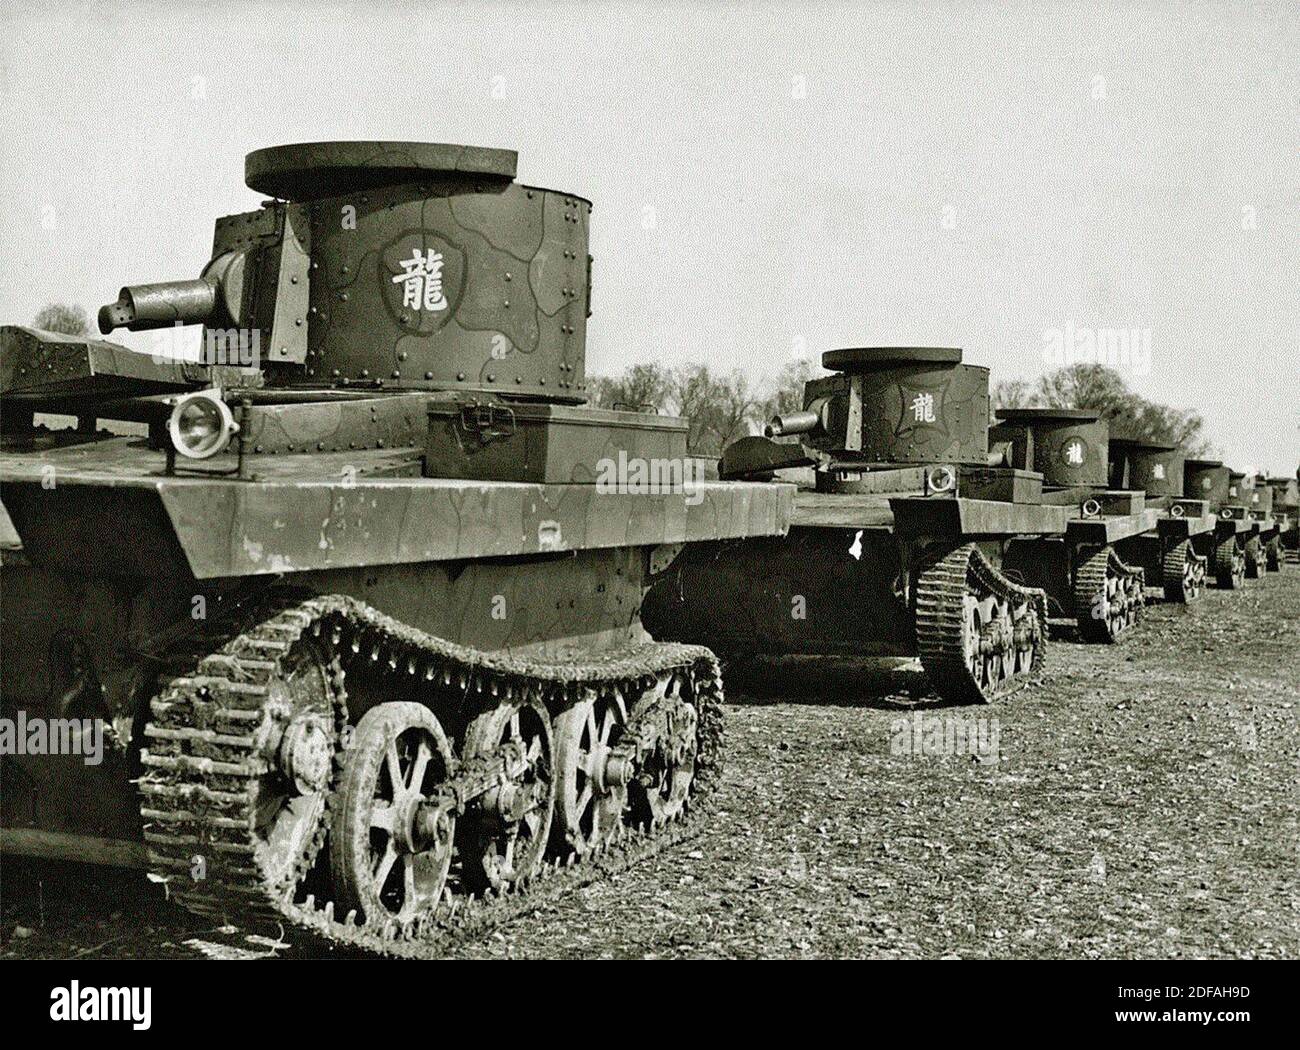 Vickers Carden Loyd Light tanks (M1931), 20 units were bought by NRA, 1940s Stock Photo